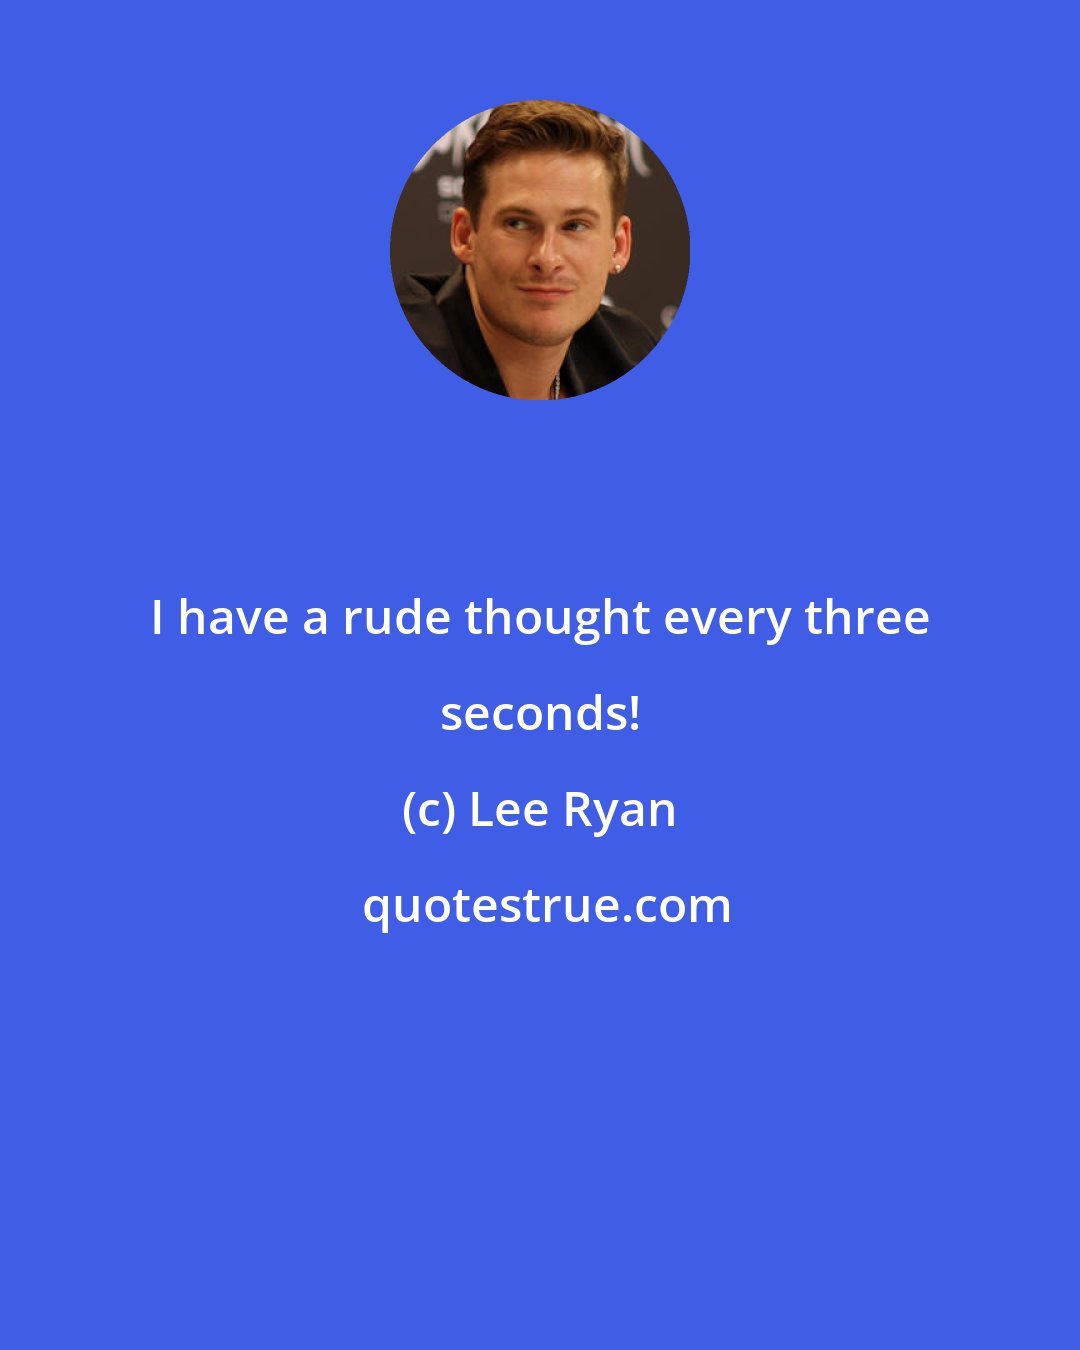 Lee Ryan: I have a rude thought every three seconds!